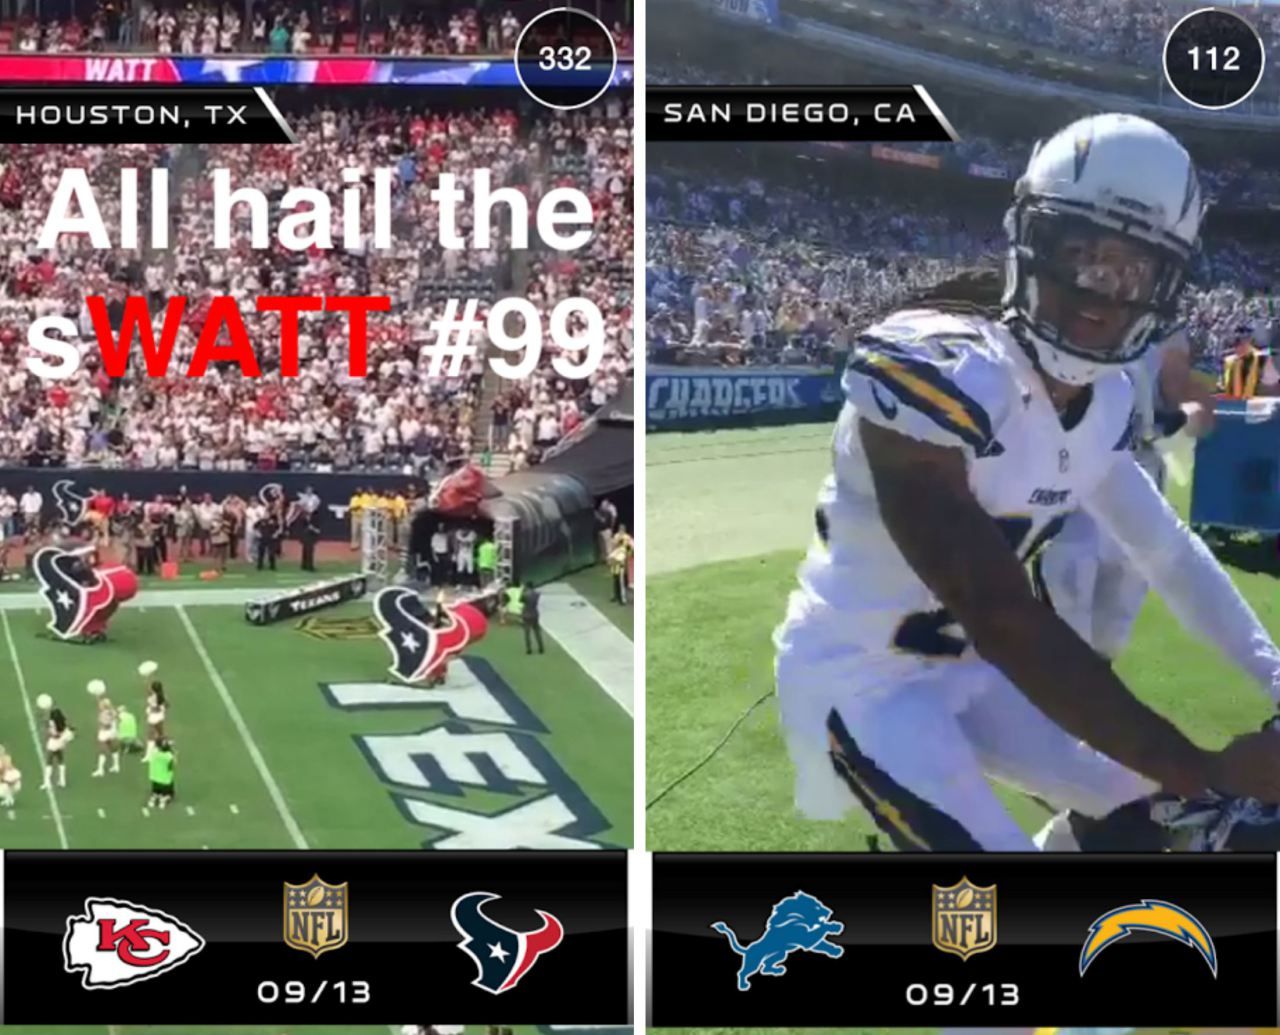 NFL and Snapchat Team Up to Bring More Game Action Digital Trends